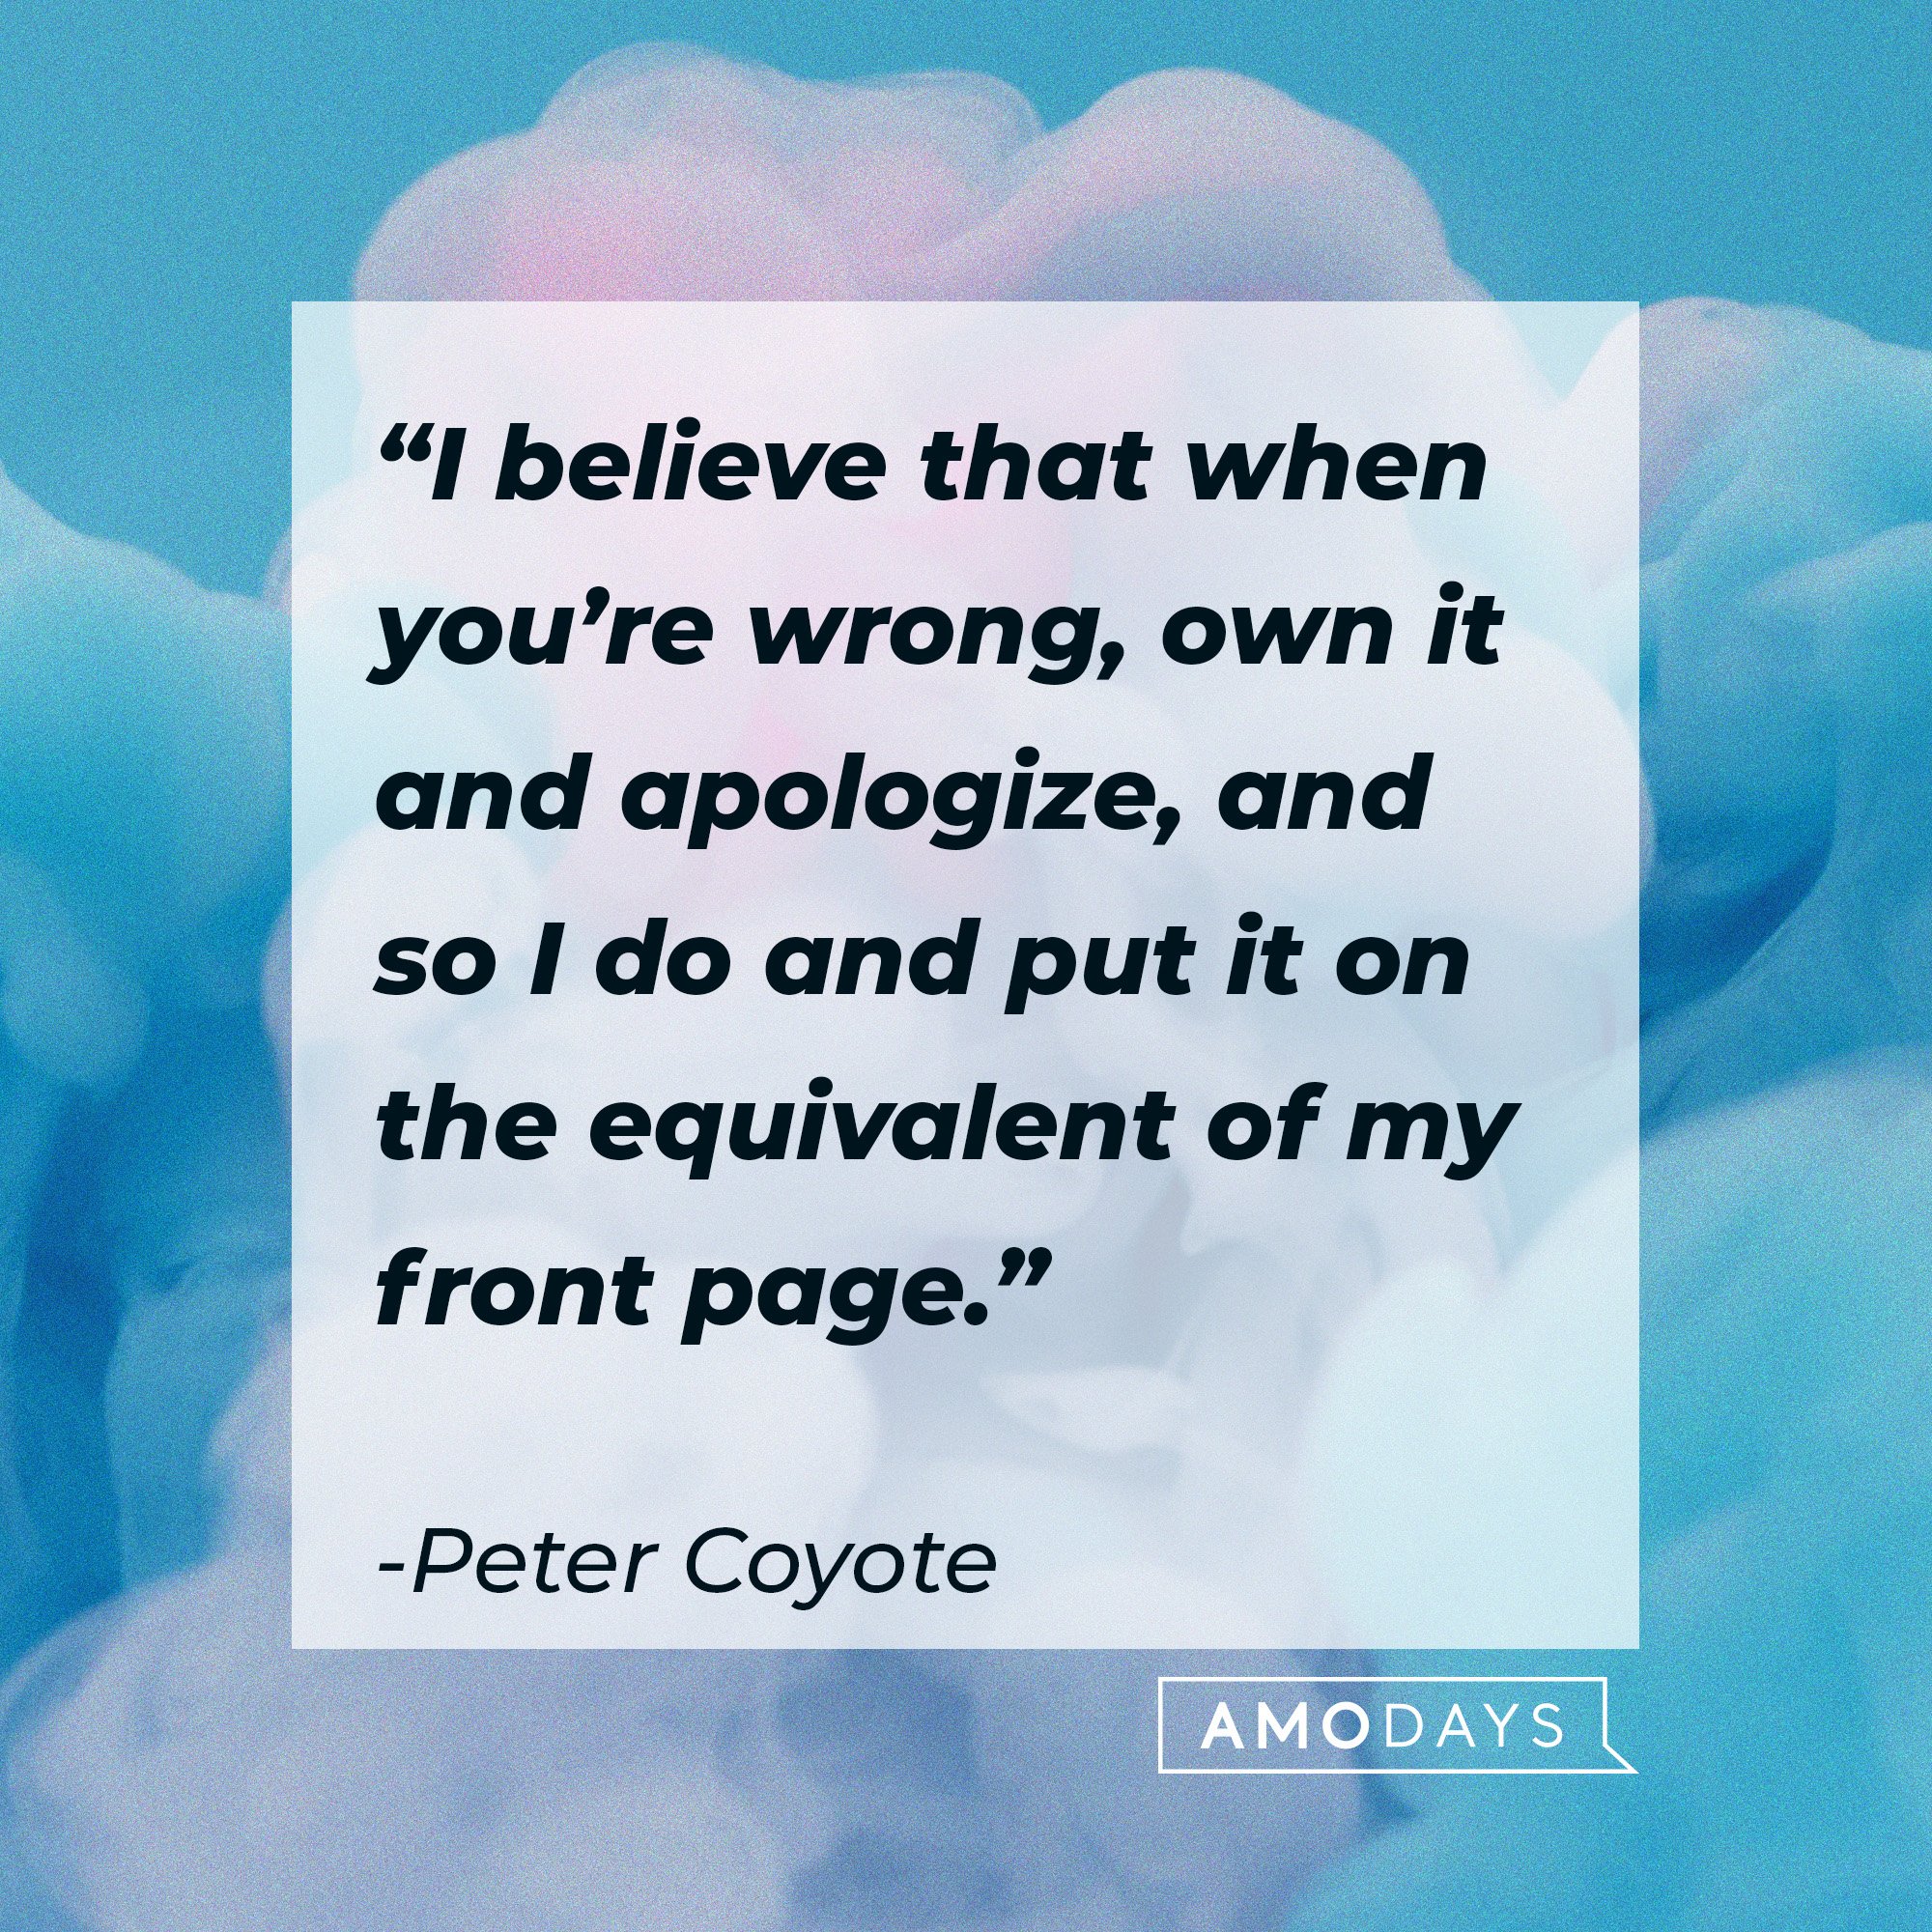 Peter Coyote's quote: “I believe that when you’re wrong, own it and apologize, and so I do and put it on the equivalent of my front page.” | Image; AmoDays